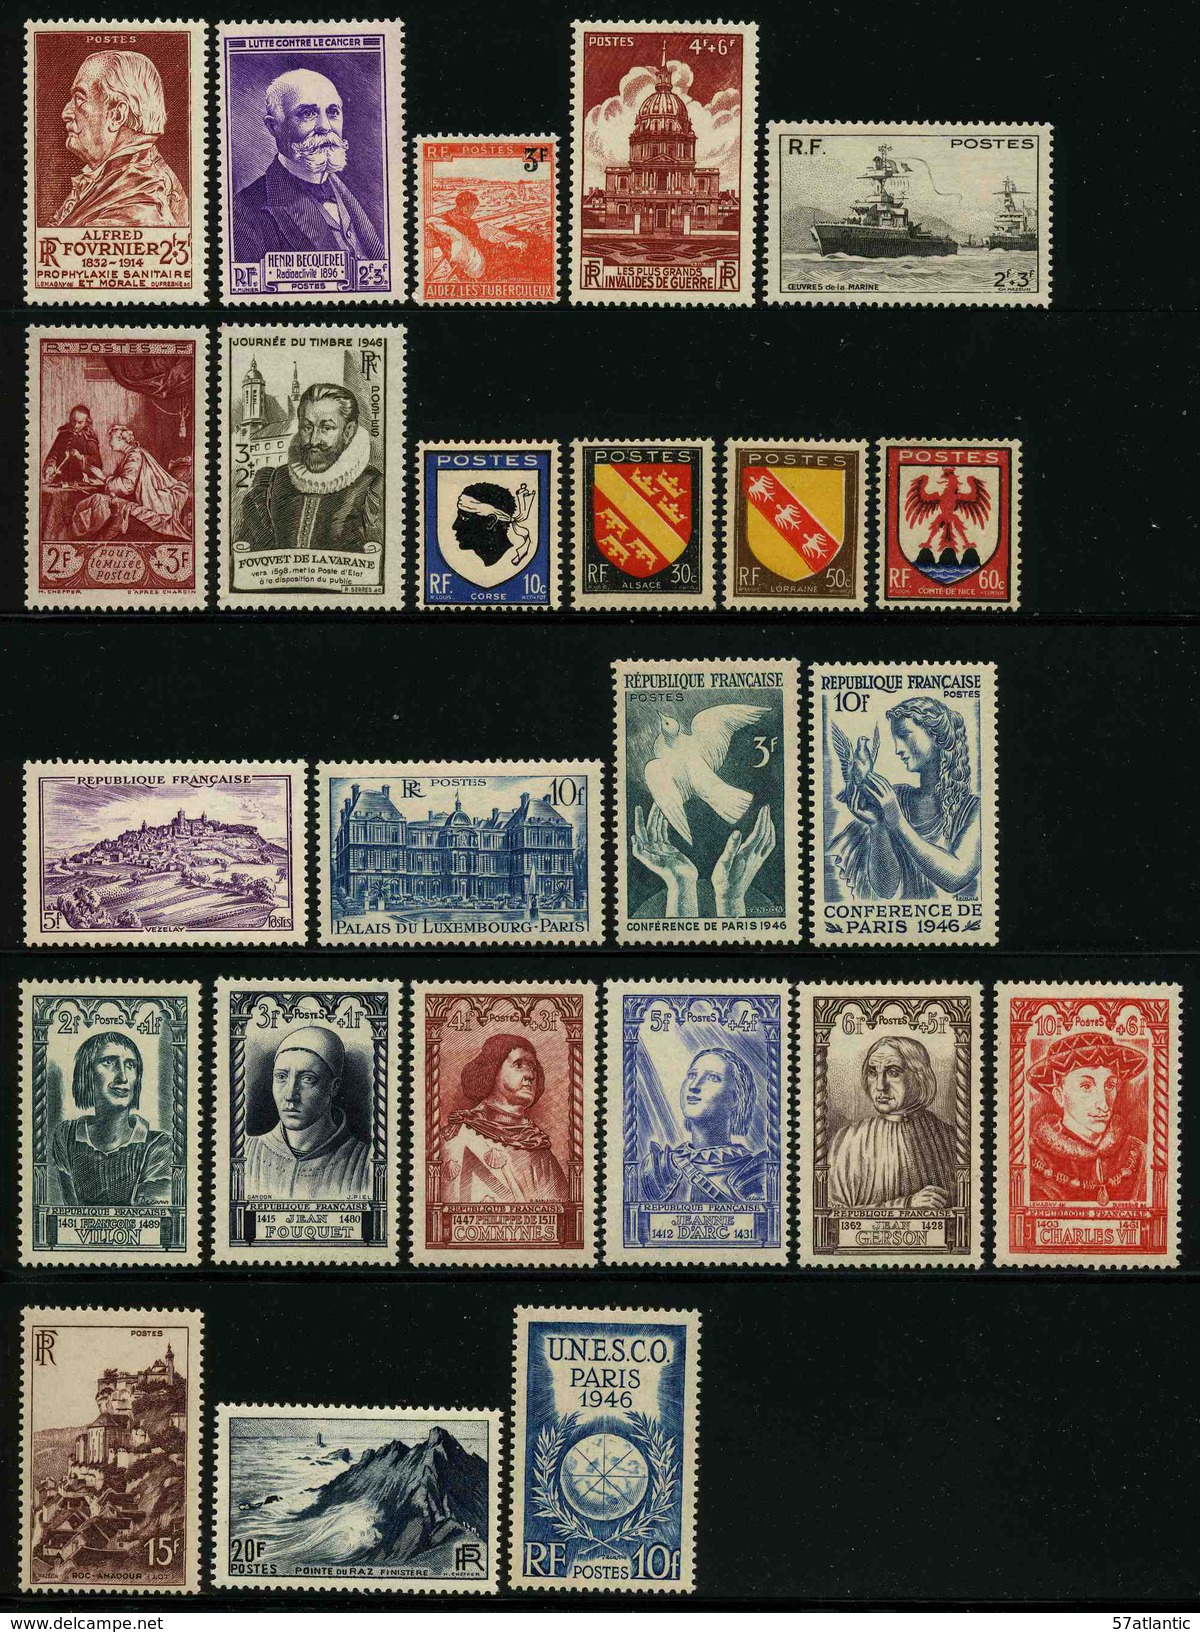 FRANCE - ANNEE COMPLETE 1946 - YT 748 à 771 ** - 24 TIMBRES NEUFS ** - 1940-1949